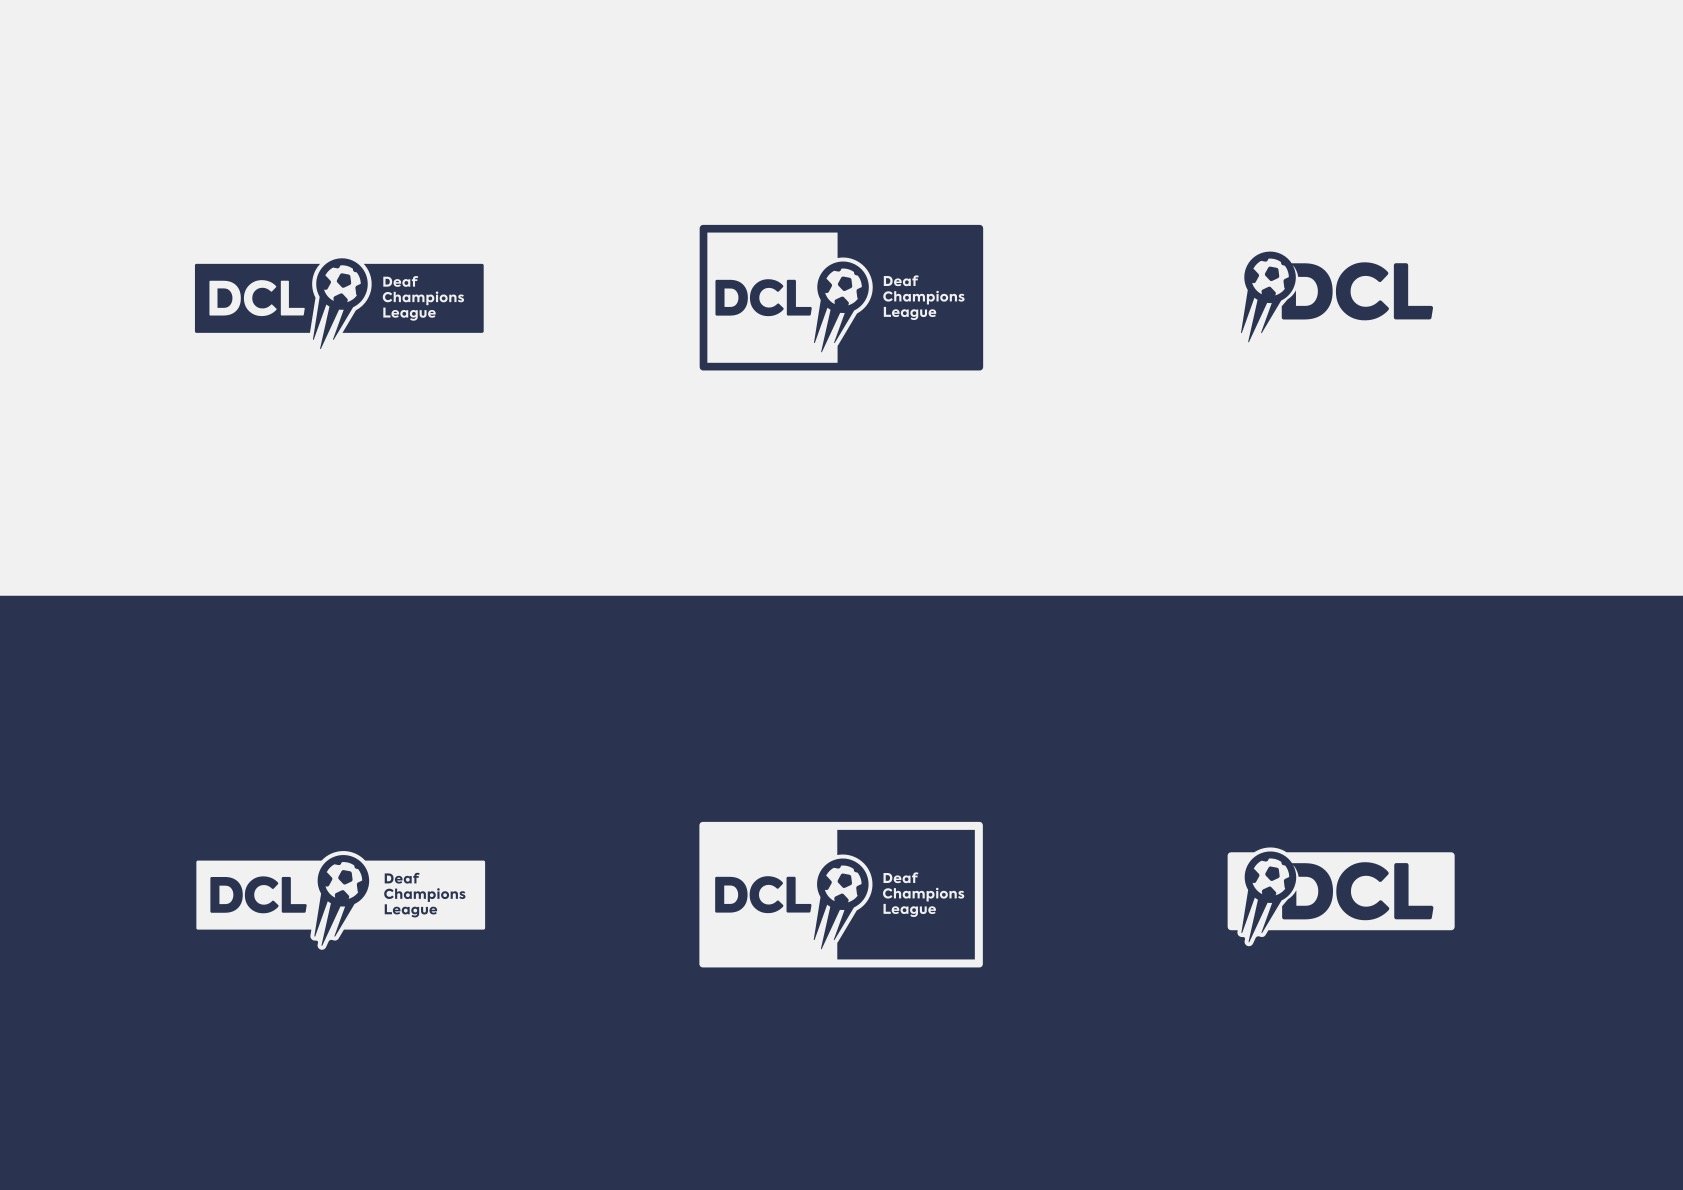 00 DCL styleguide1